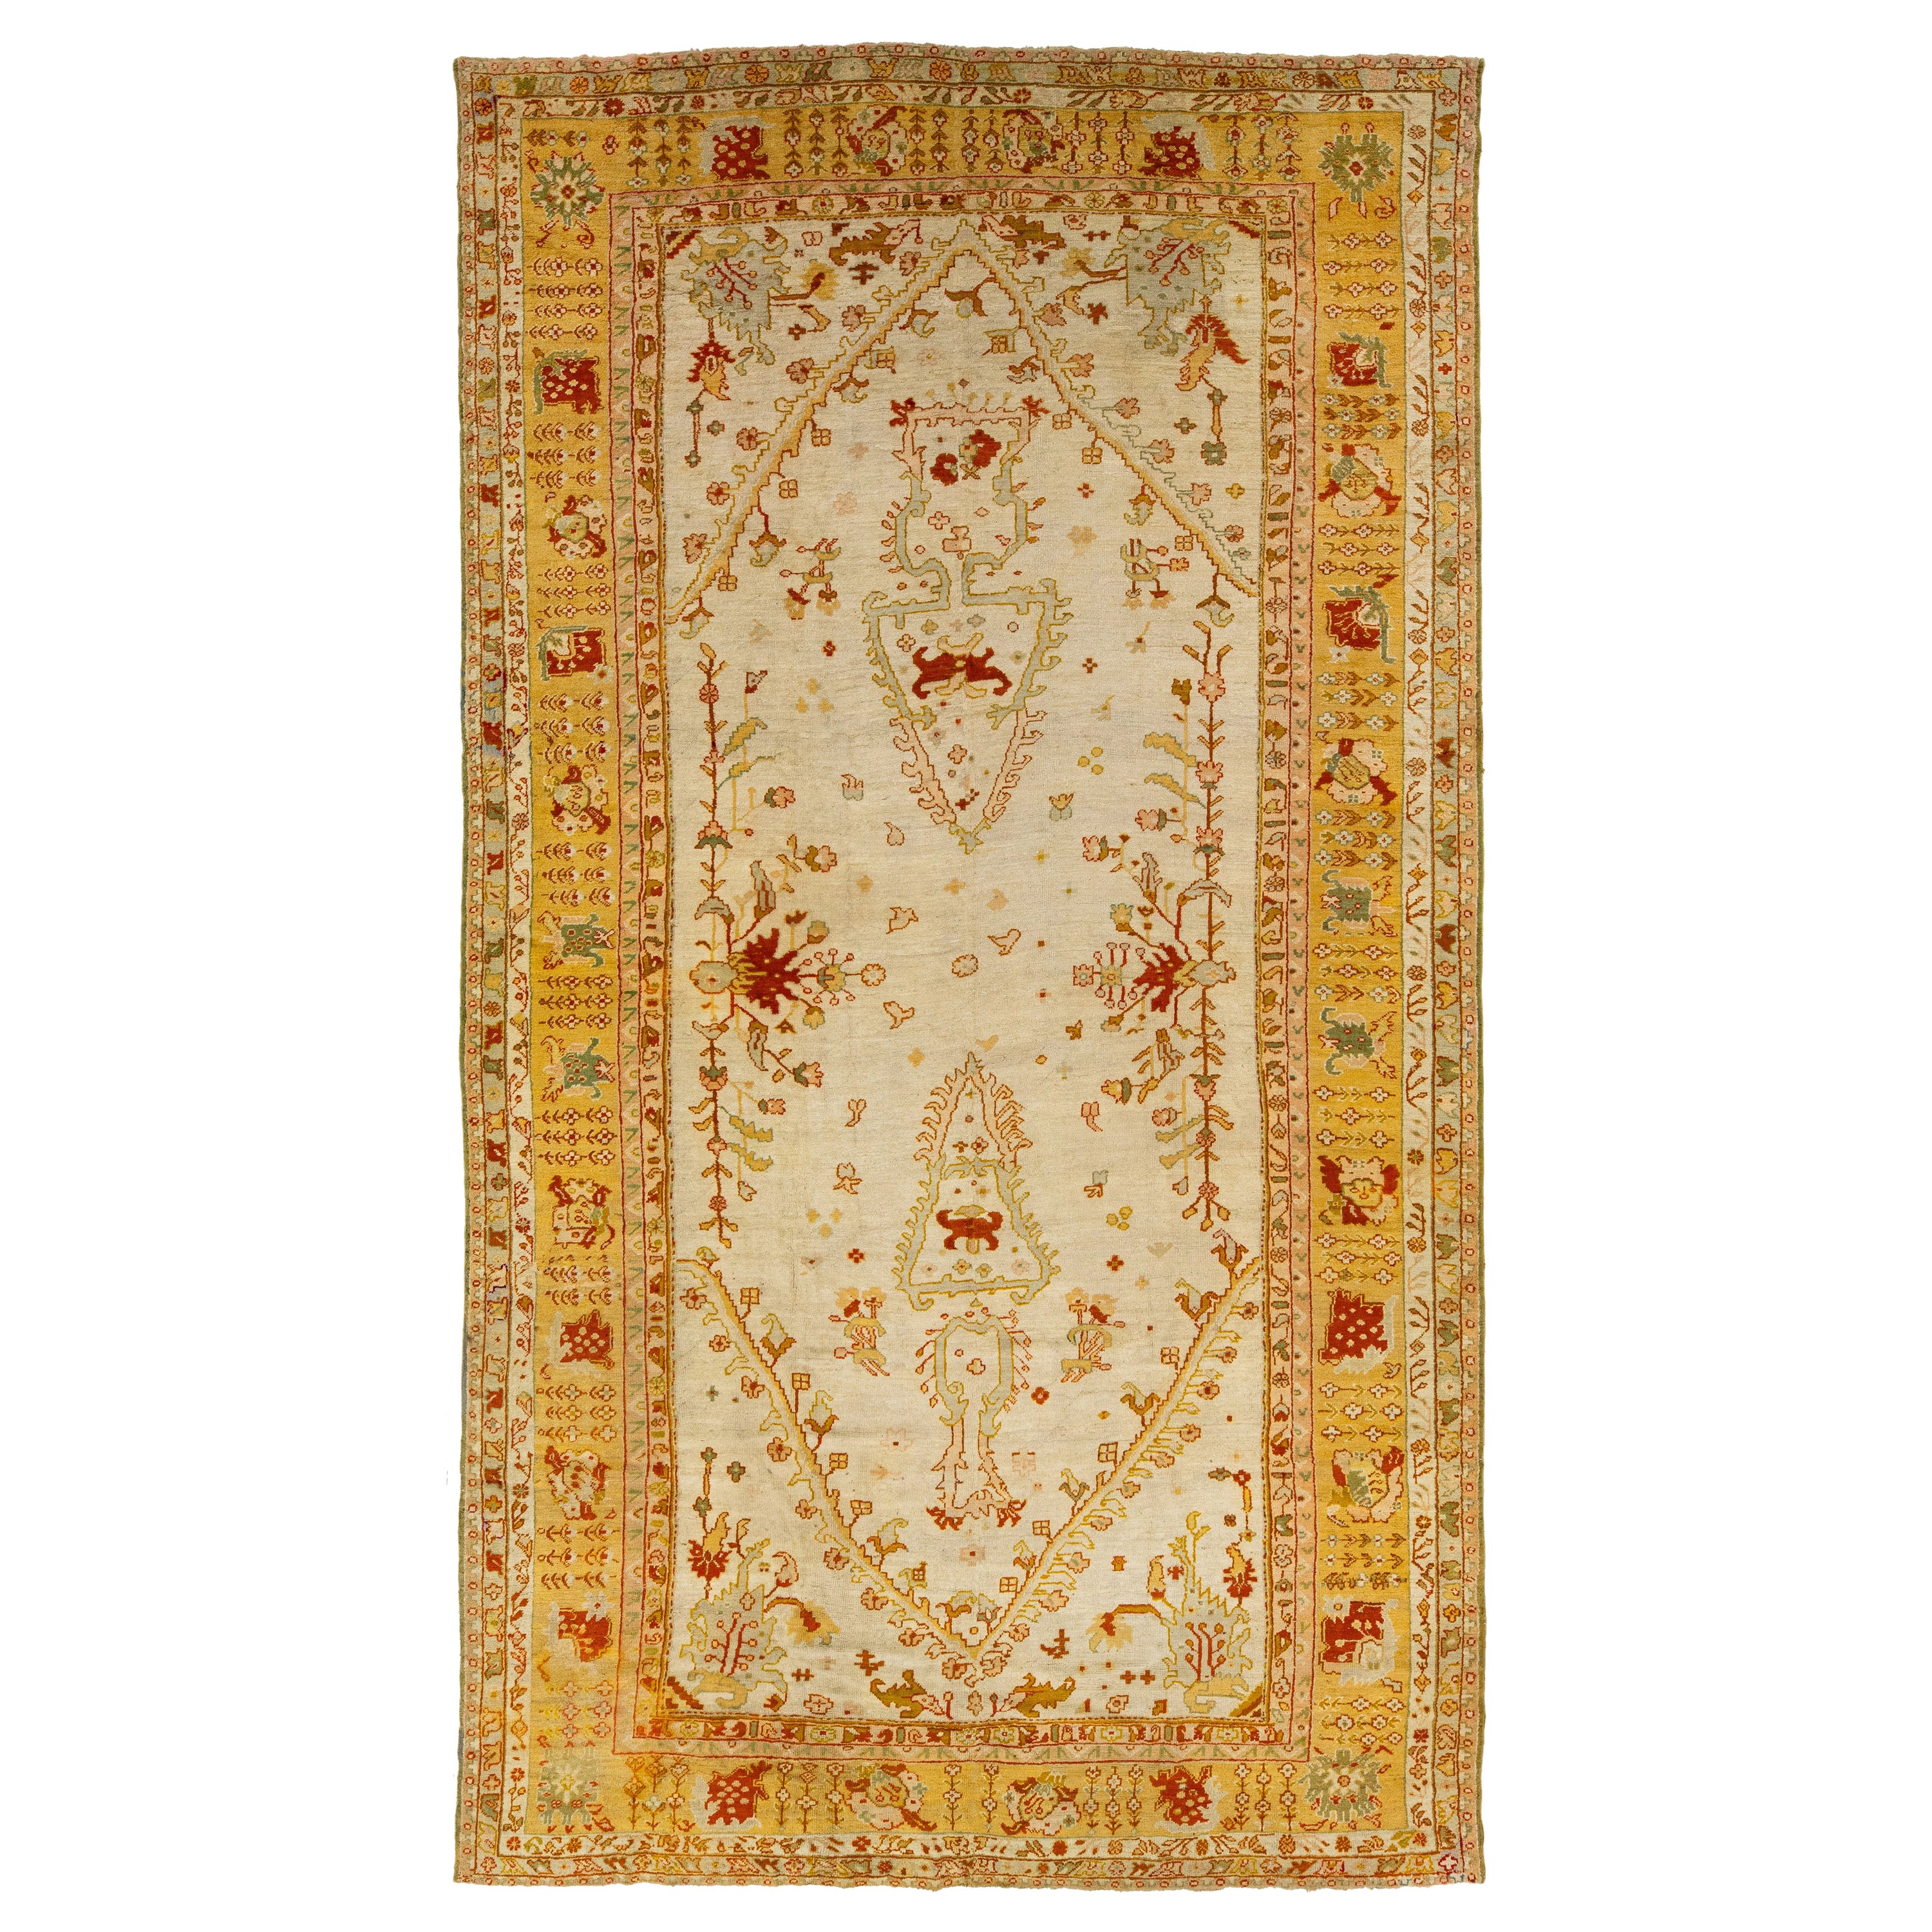 19th Century Turkish Oushak Wool Rug In Beige Color And Allover Motif For Sale